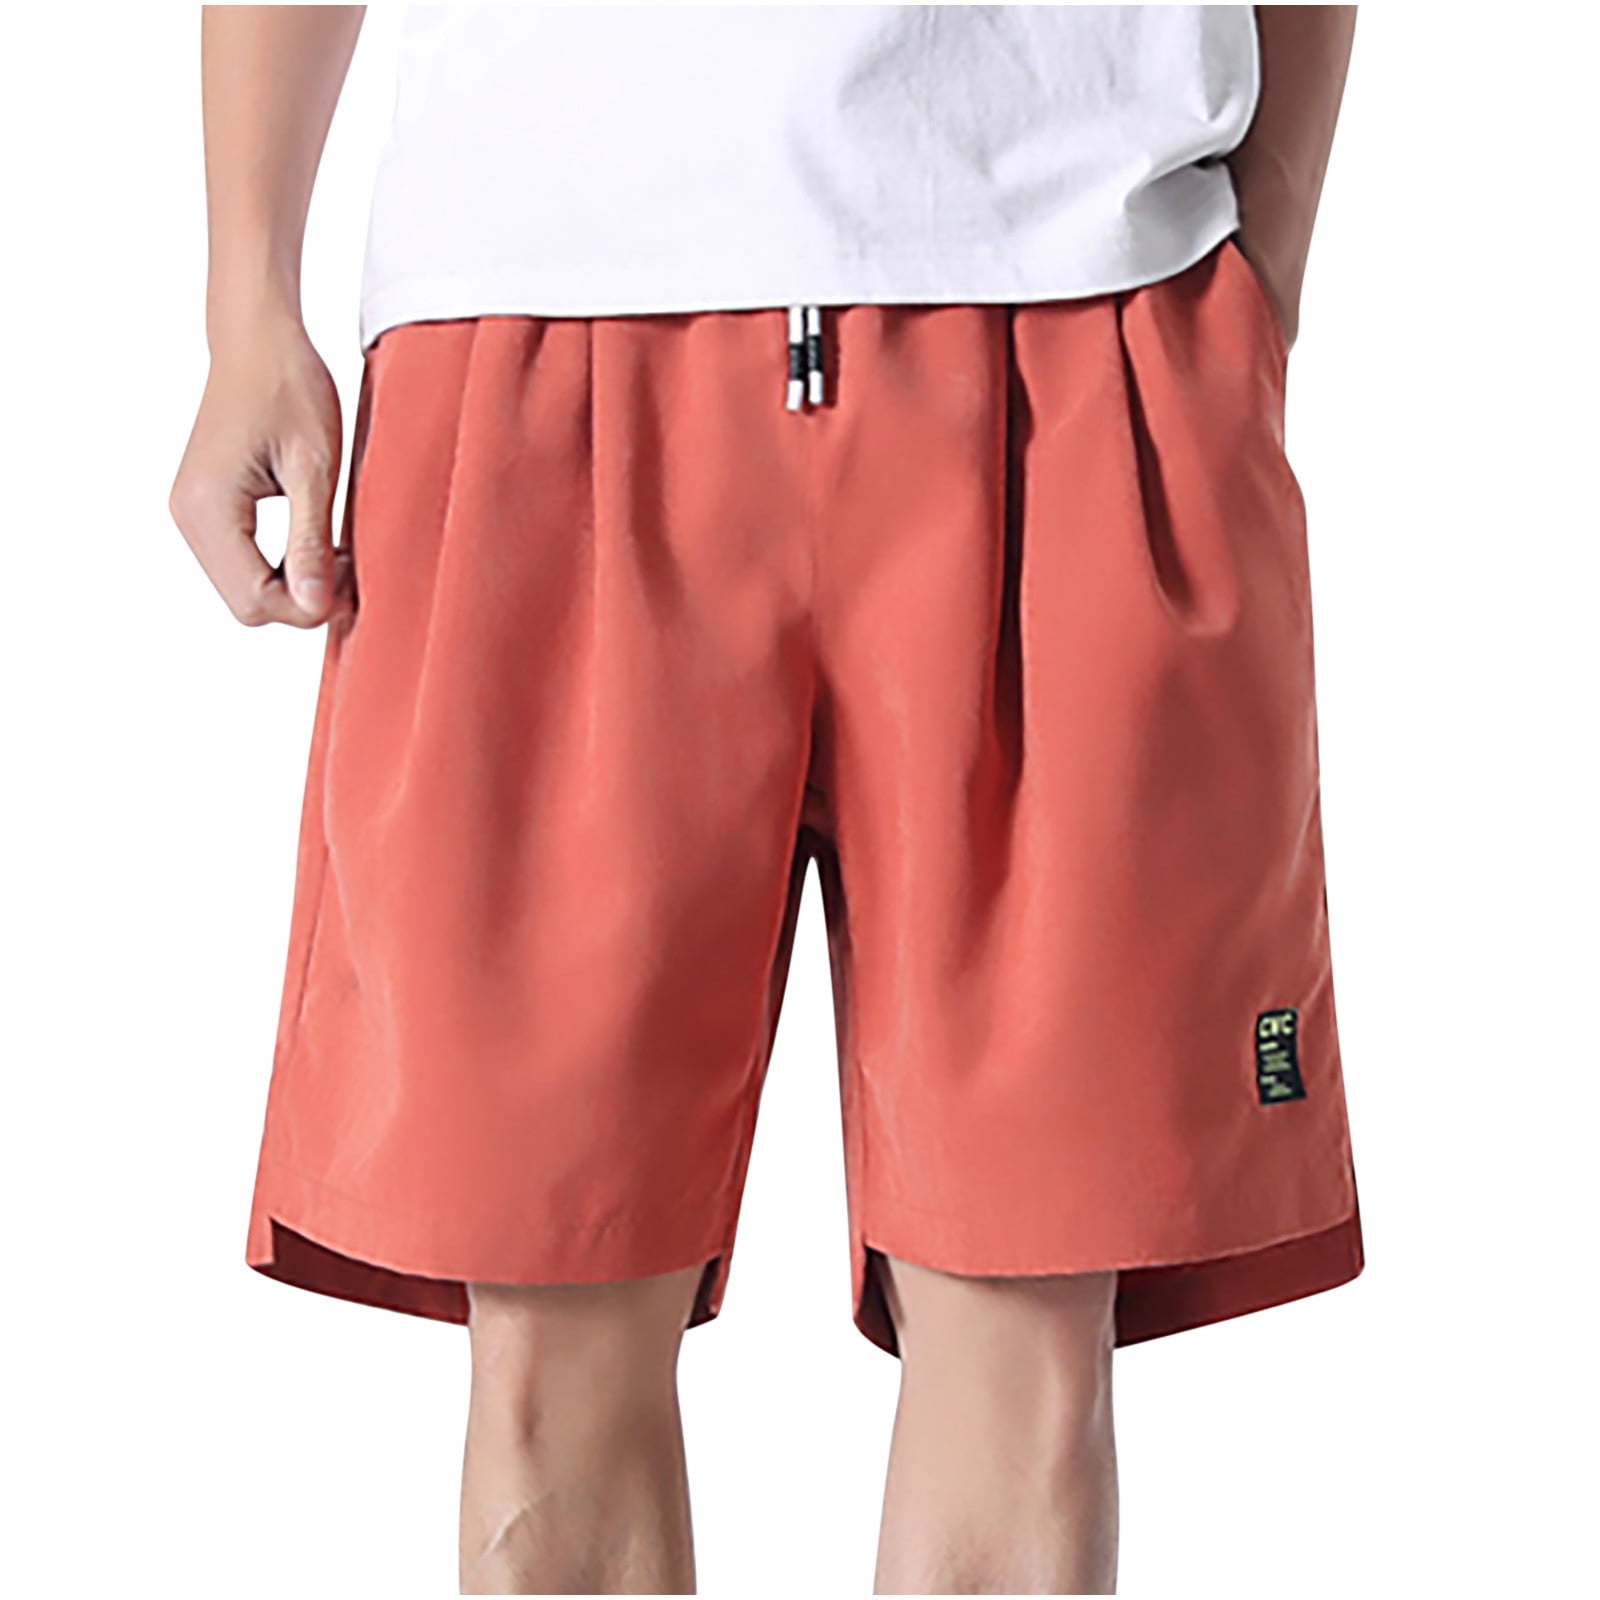 Guzom Men's and Big Men's Cargo Shorts- Trendy Casual with Pocket Solid  Sport Pants for Less Khaki Size 6XL 